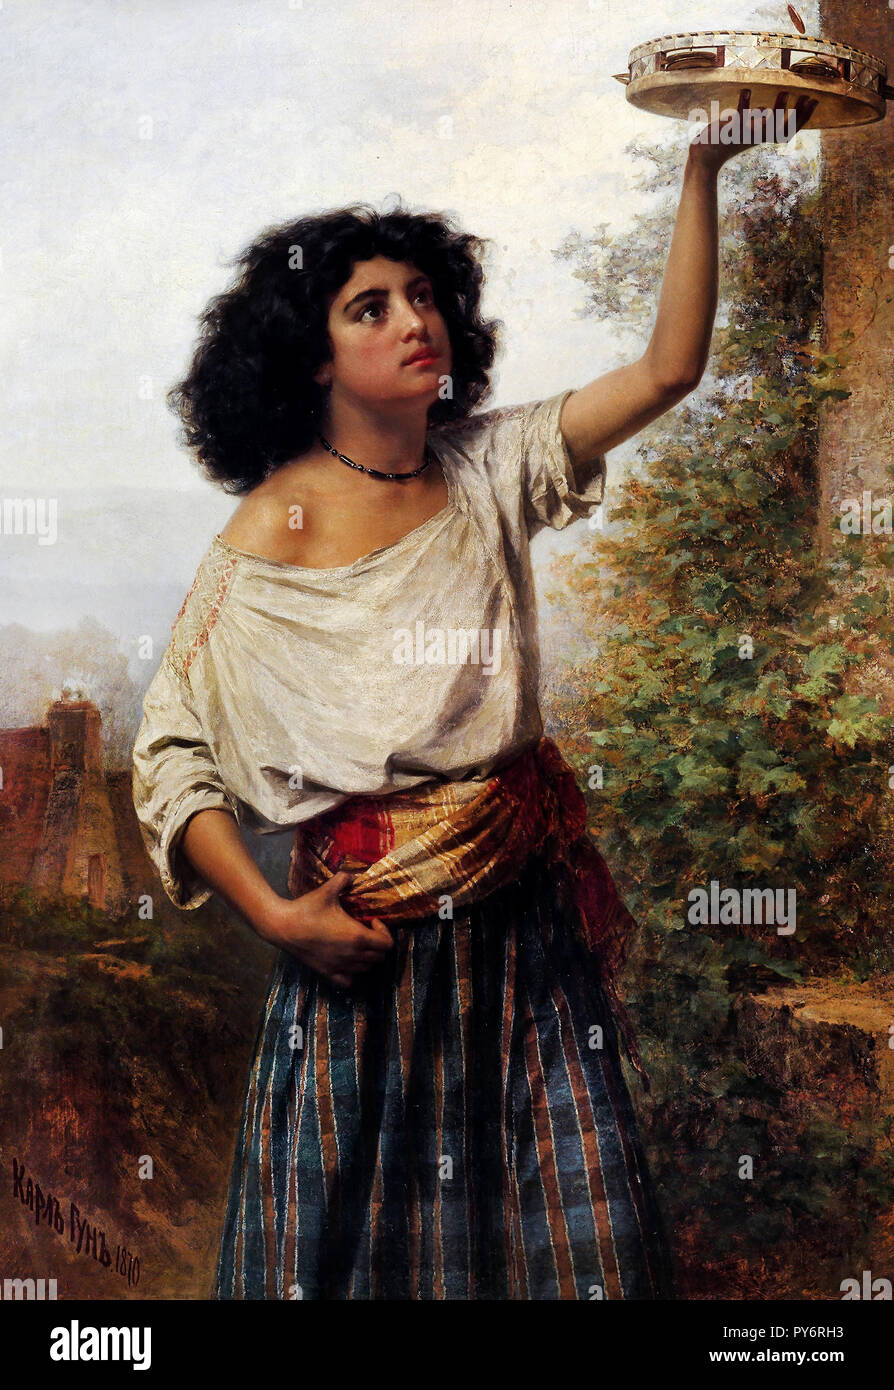 Carl Huns, A Young Gypsy Woman with a Tambourine 1870 Oil on canvas, Latvian Museum of Foreign Art, Riga, Latvia. Stock Photo